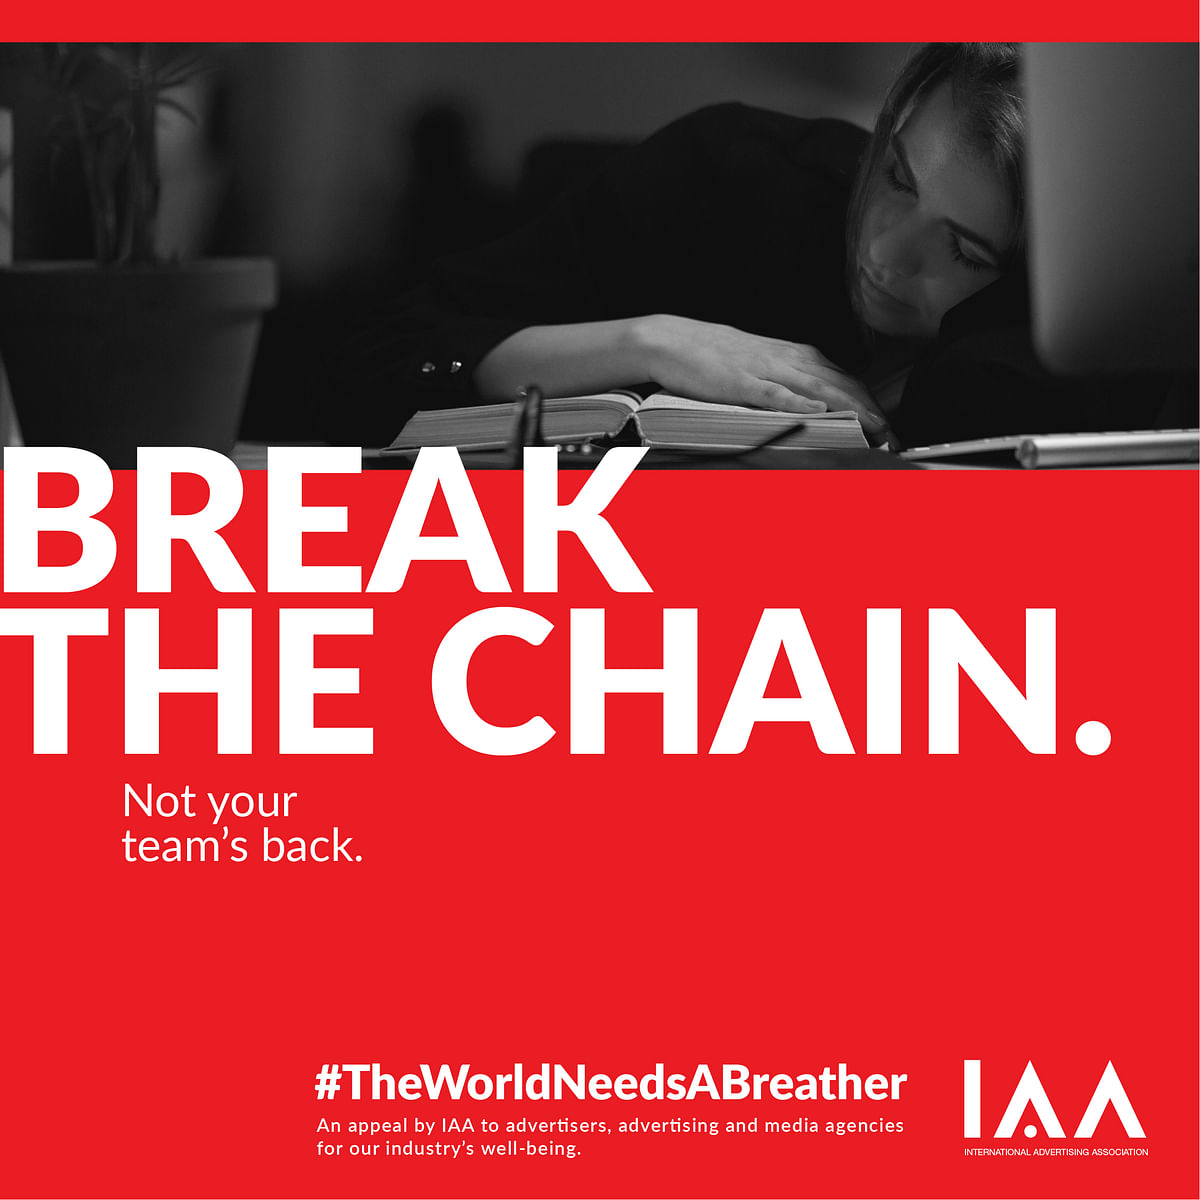 The IAA urges advertisers and agencies to take a breather